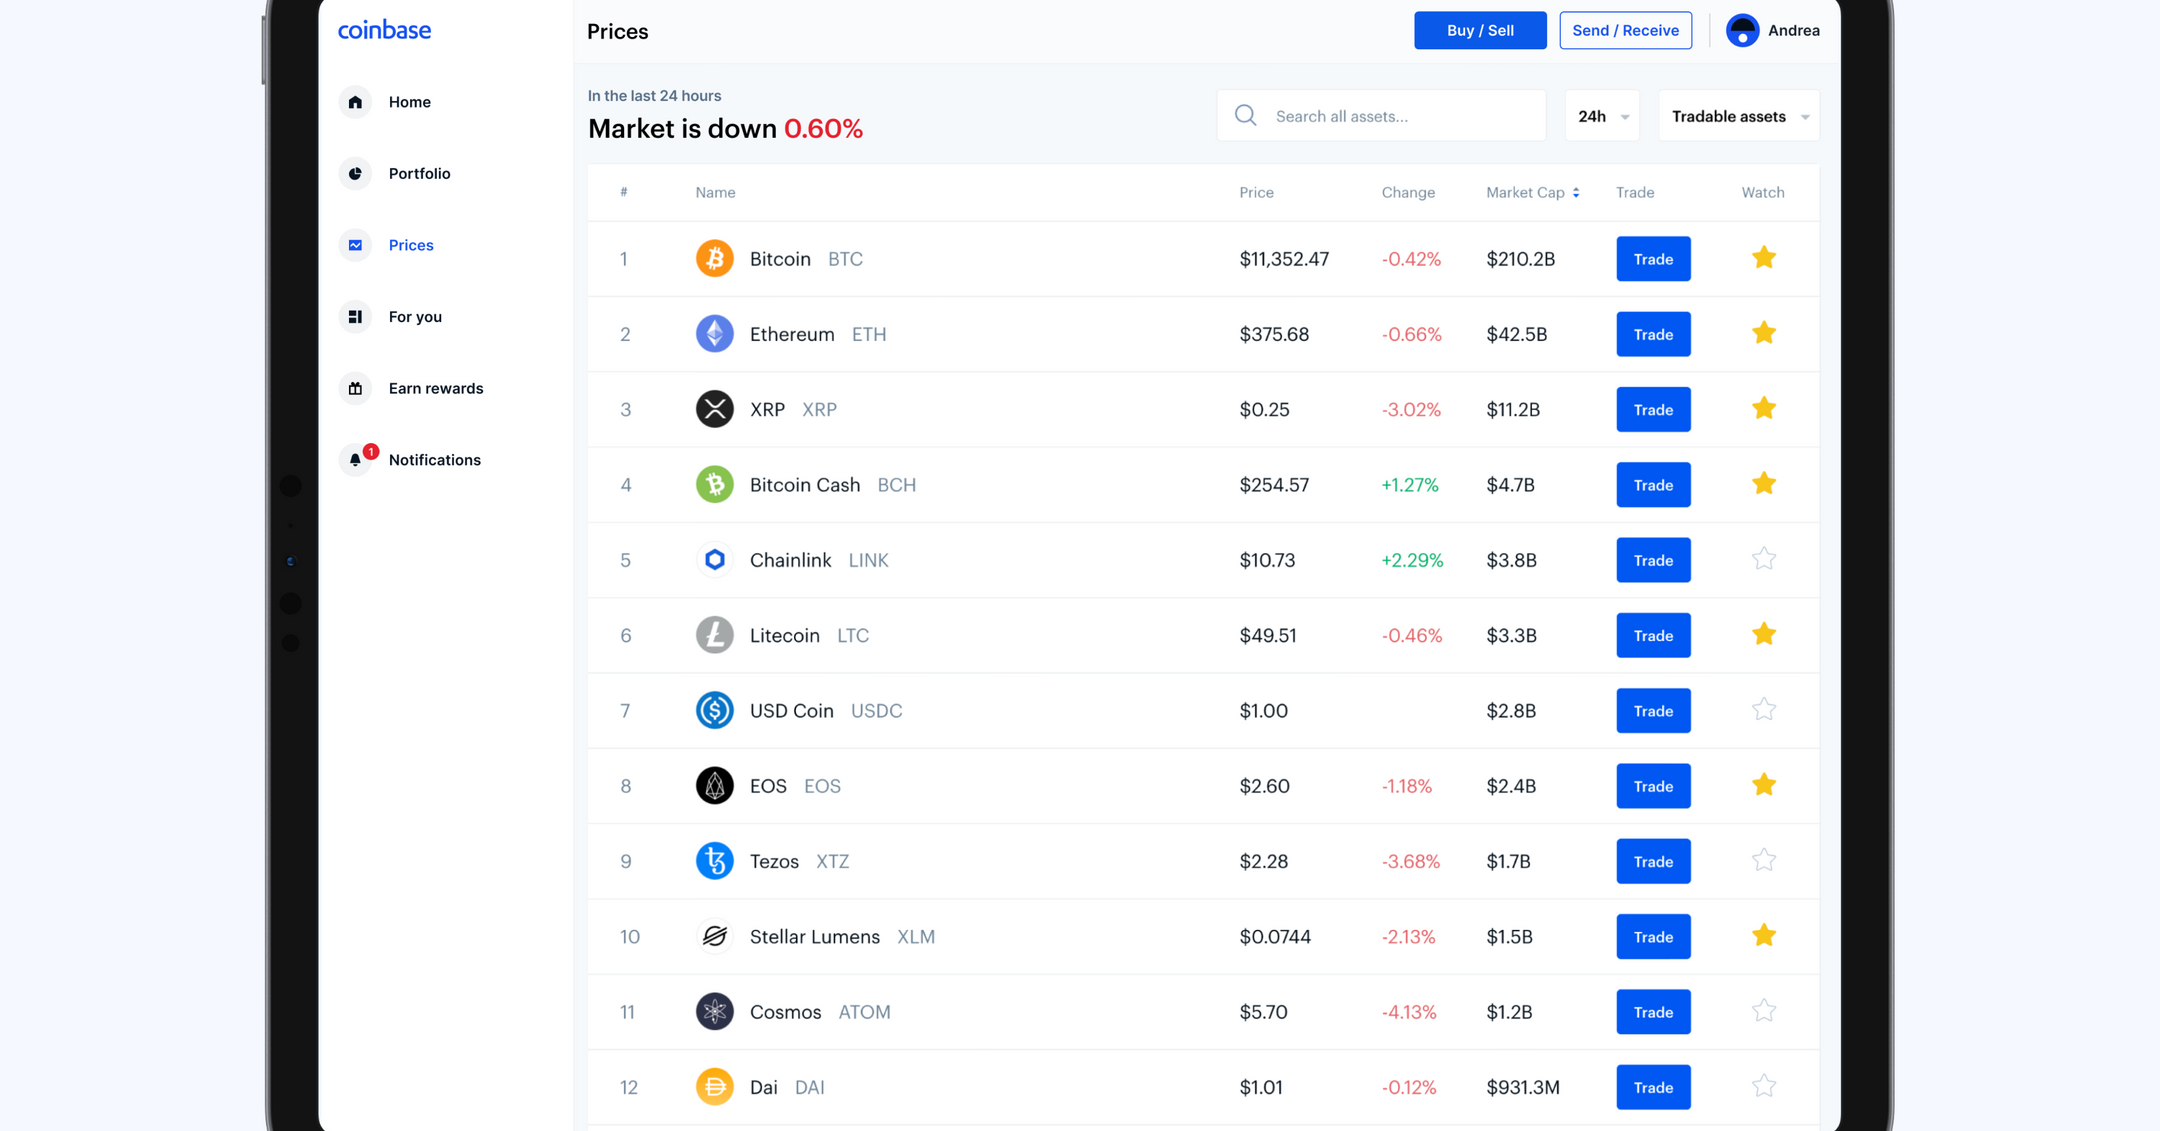 Speculation About Coinbase's IPO Price Before It Goes Public